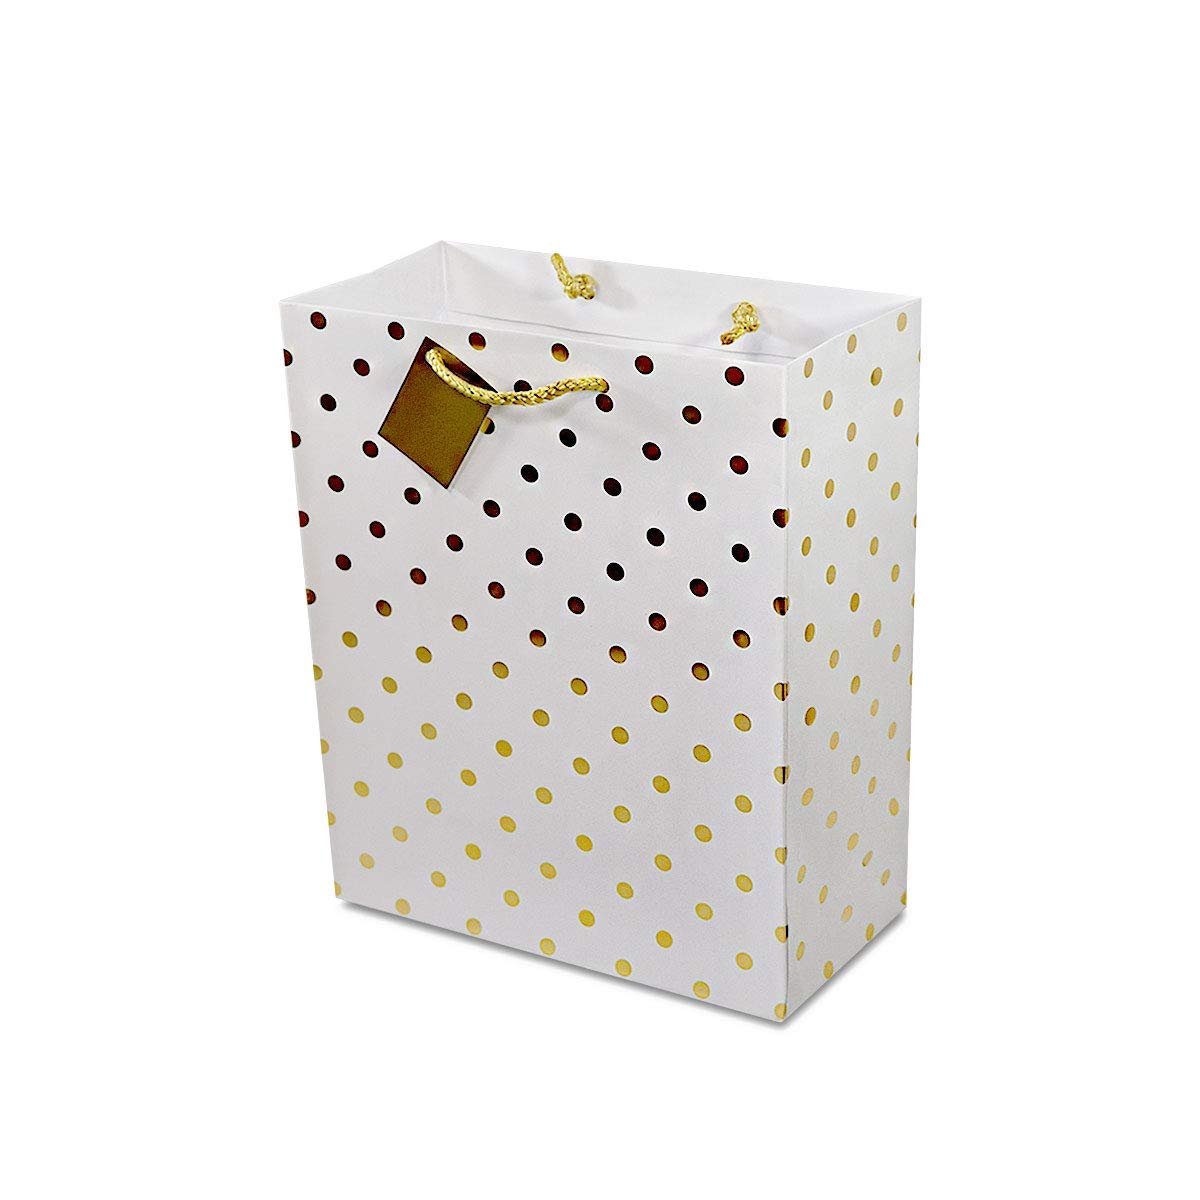 OccasionAll Gold Gift Bags - 6x3x7.5 Inch (Pack of 12) - Small Metallic Paper Bags with Handles, Chevron, Polka Dot & Stripe Prints - Perfect for Parties, Weddings, Holidays & Showers